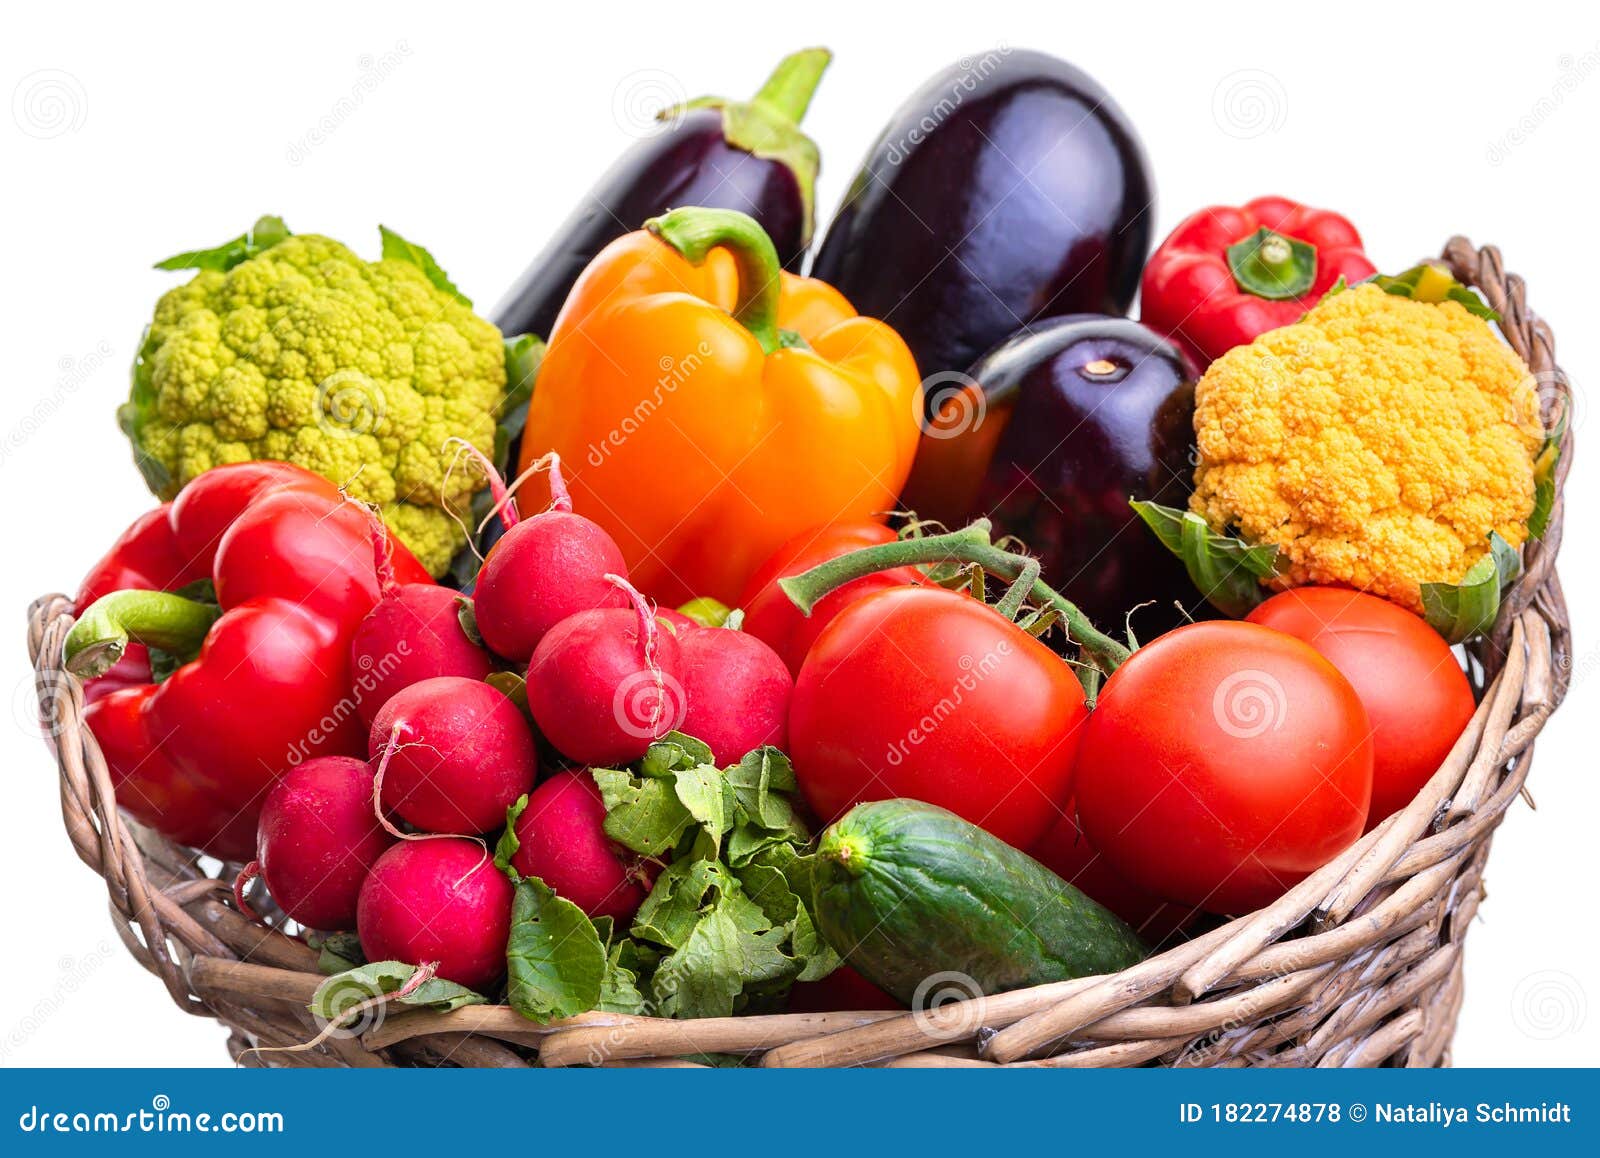 Vegetables in a Wicker Basket. Isolate on White Background Stock Photo ...